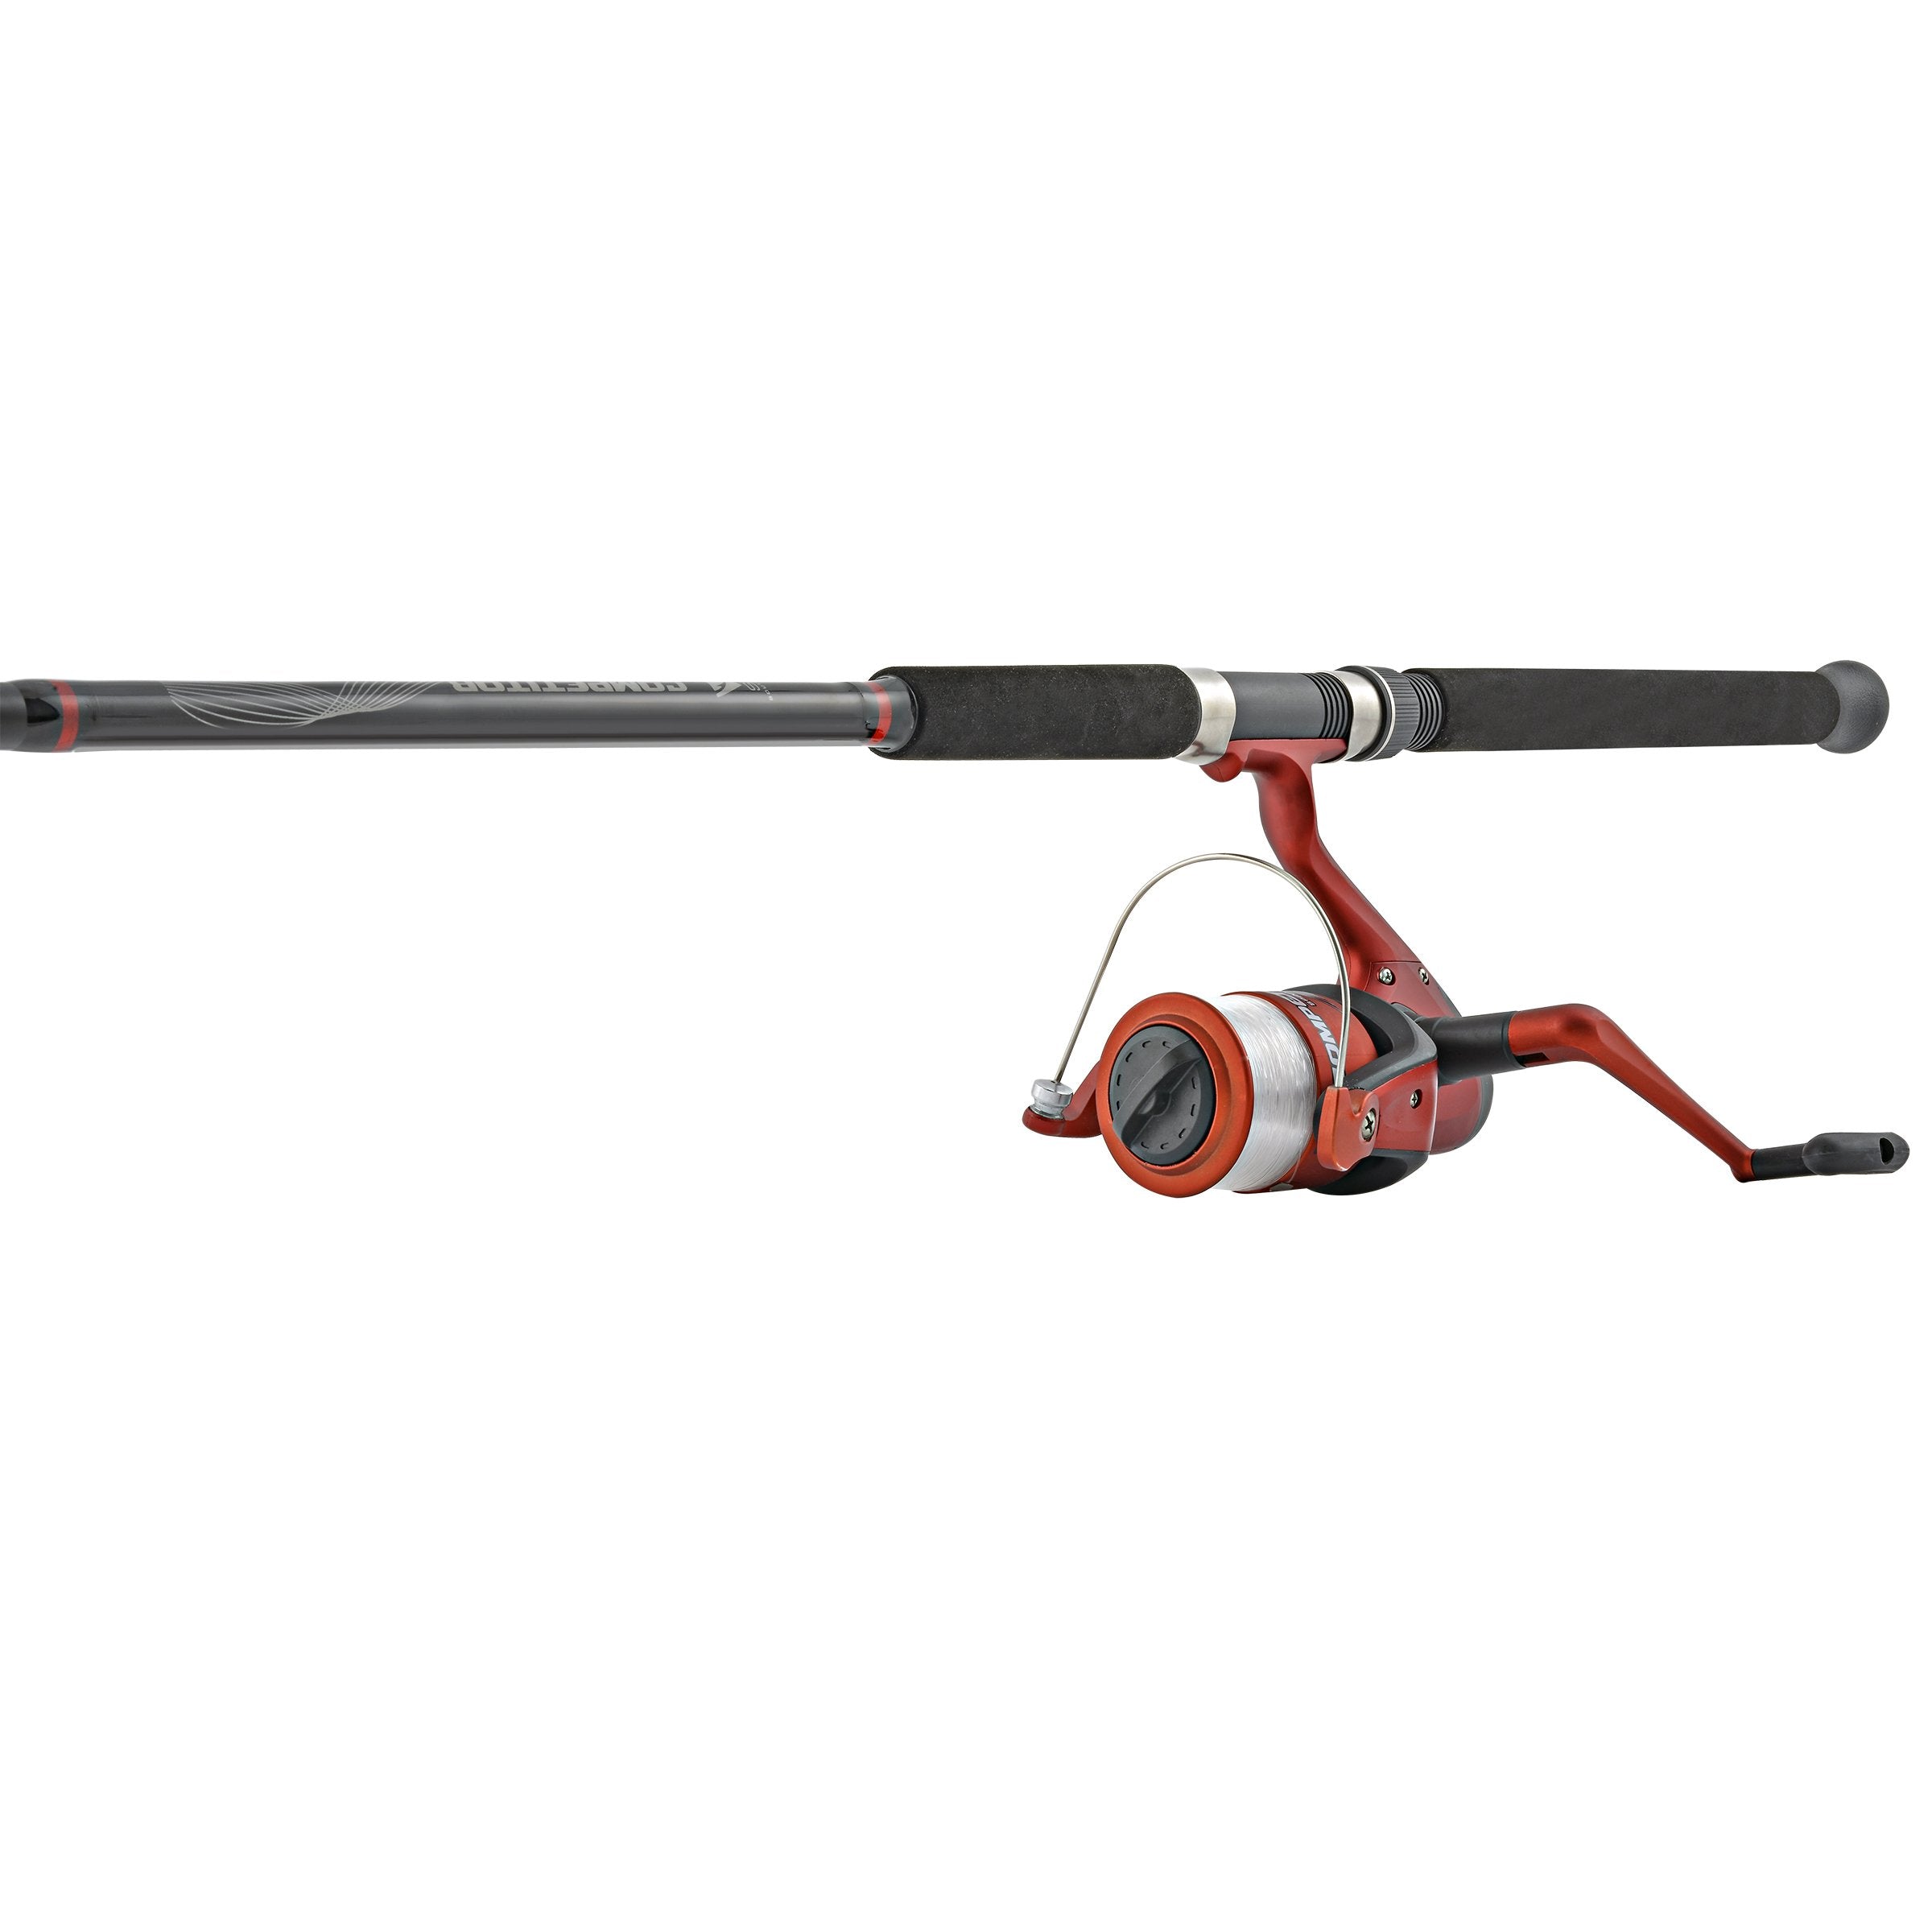 Best Saltwater Rod and Reel Combo in 2021– Get Amazing Experience! 